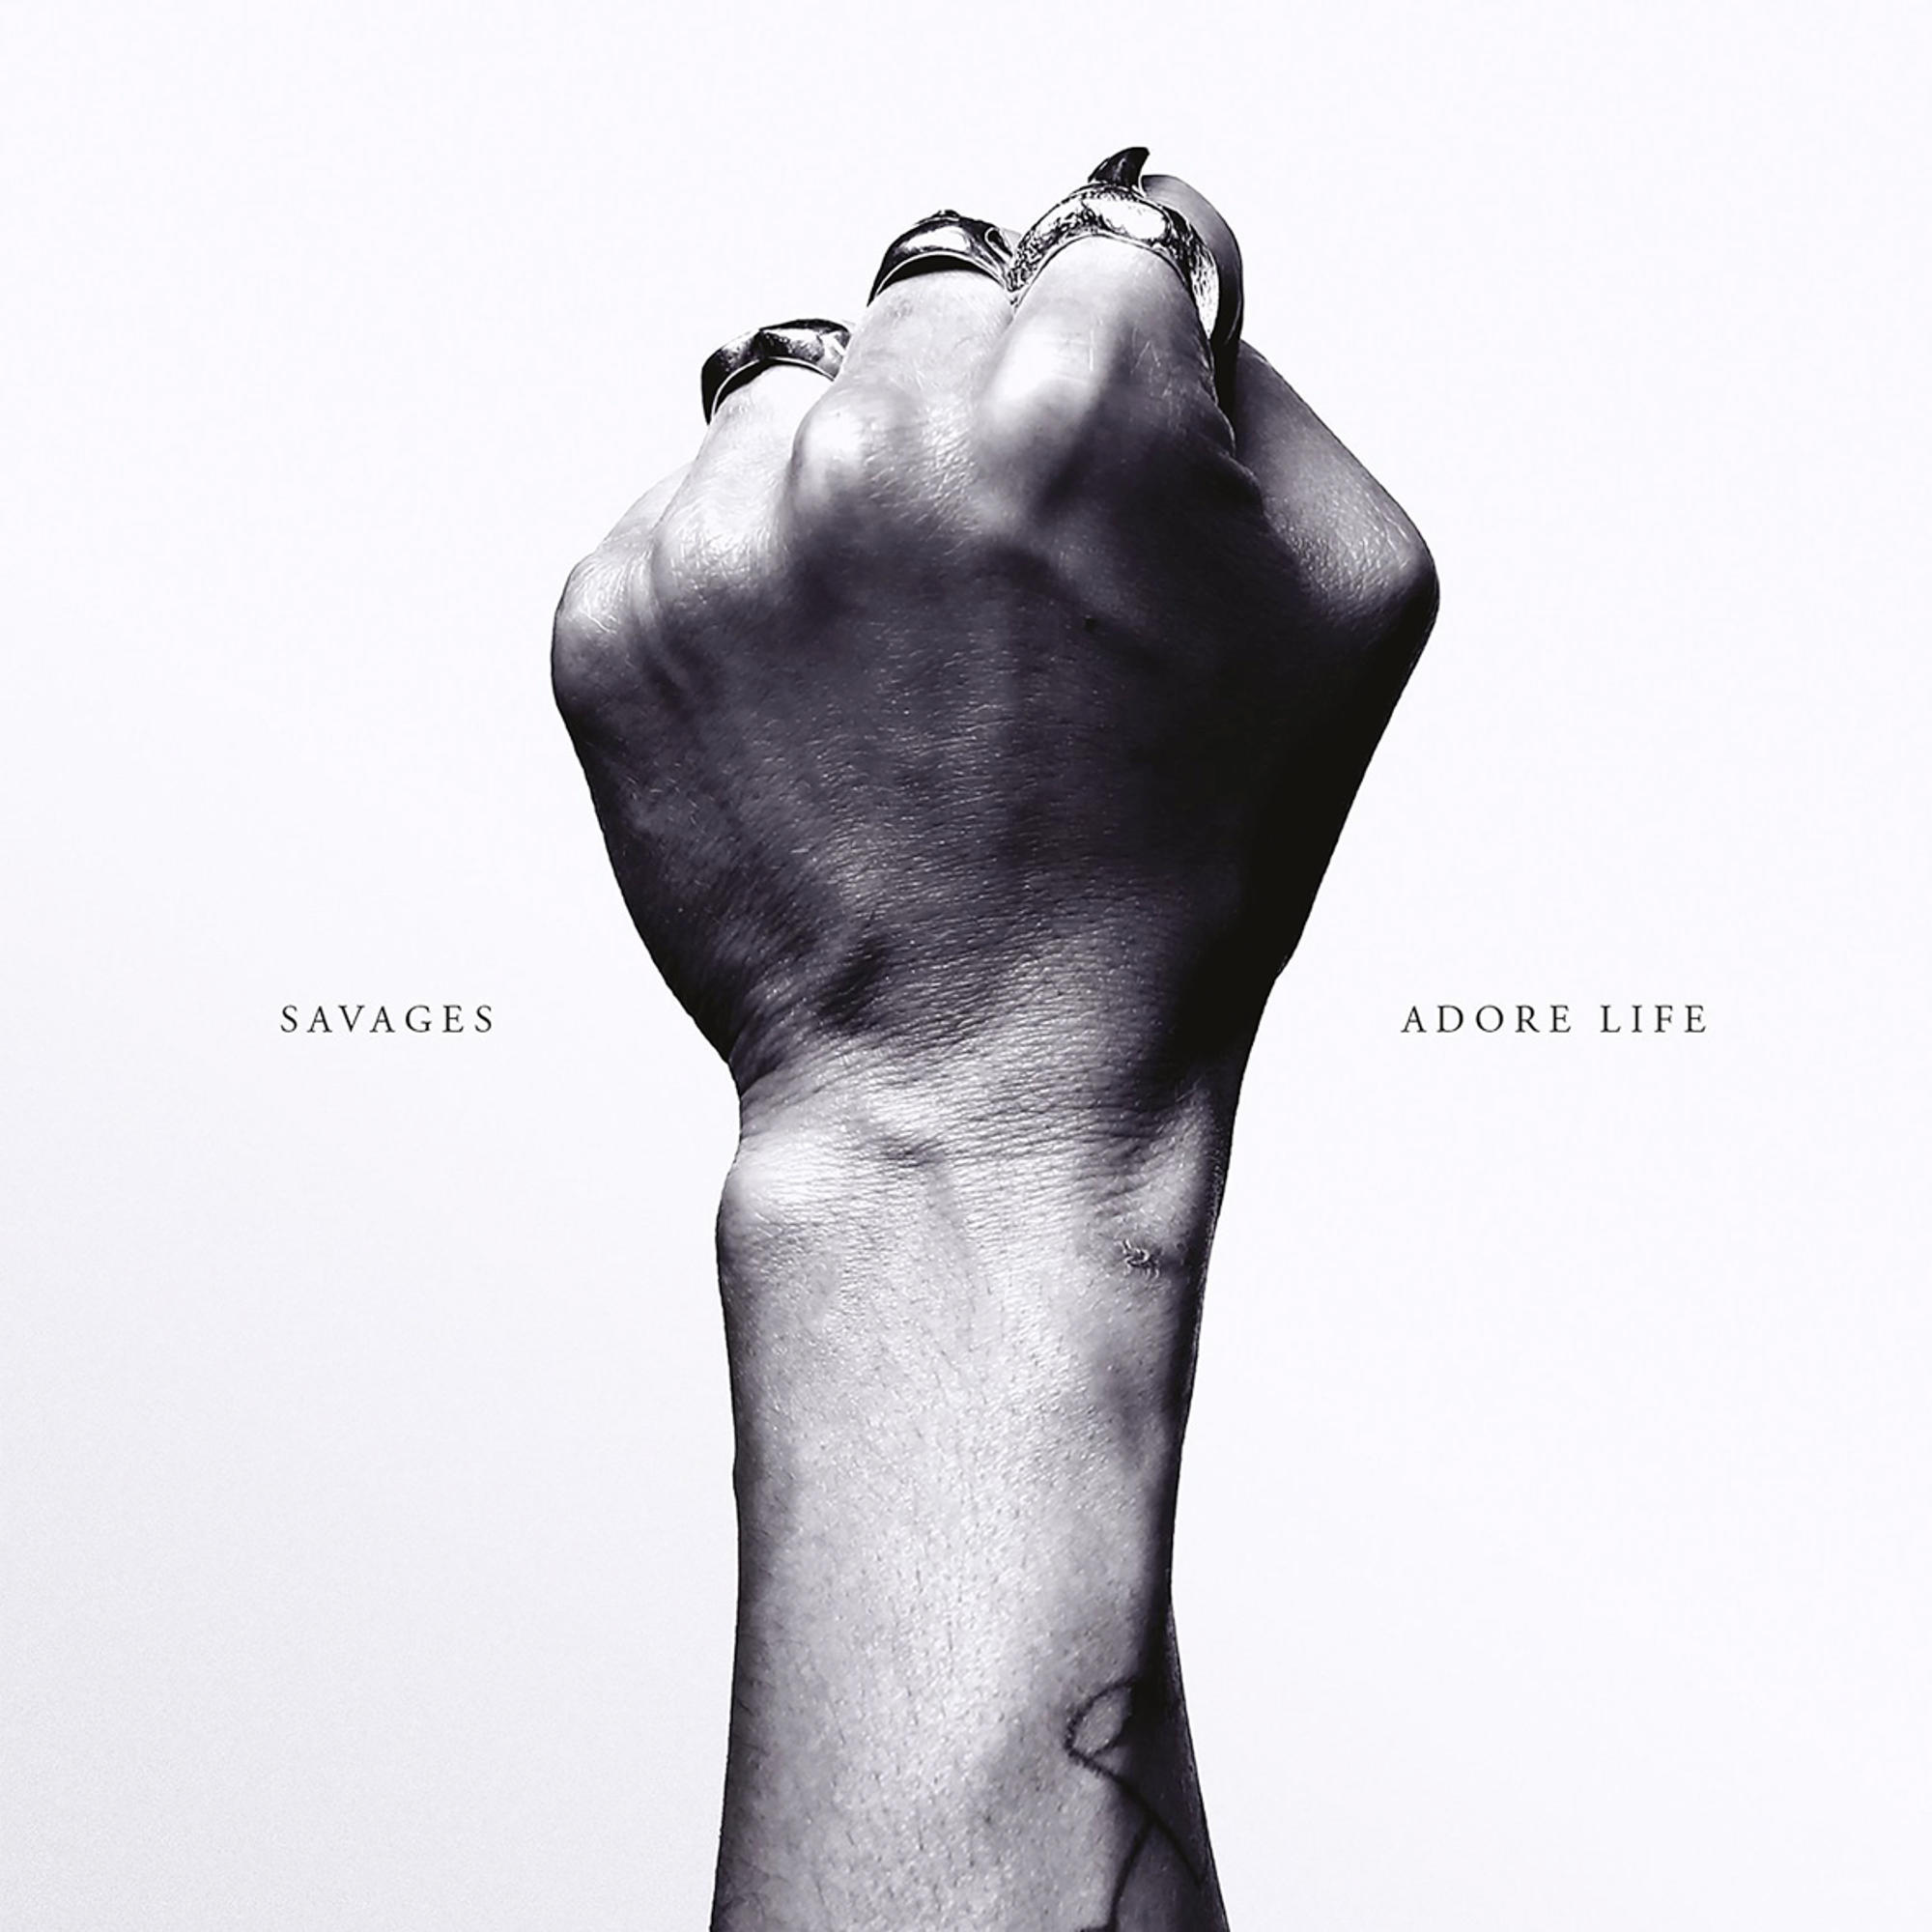 Life + Download) - - The Adore (LP Savages